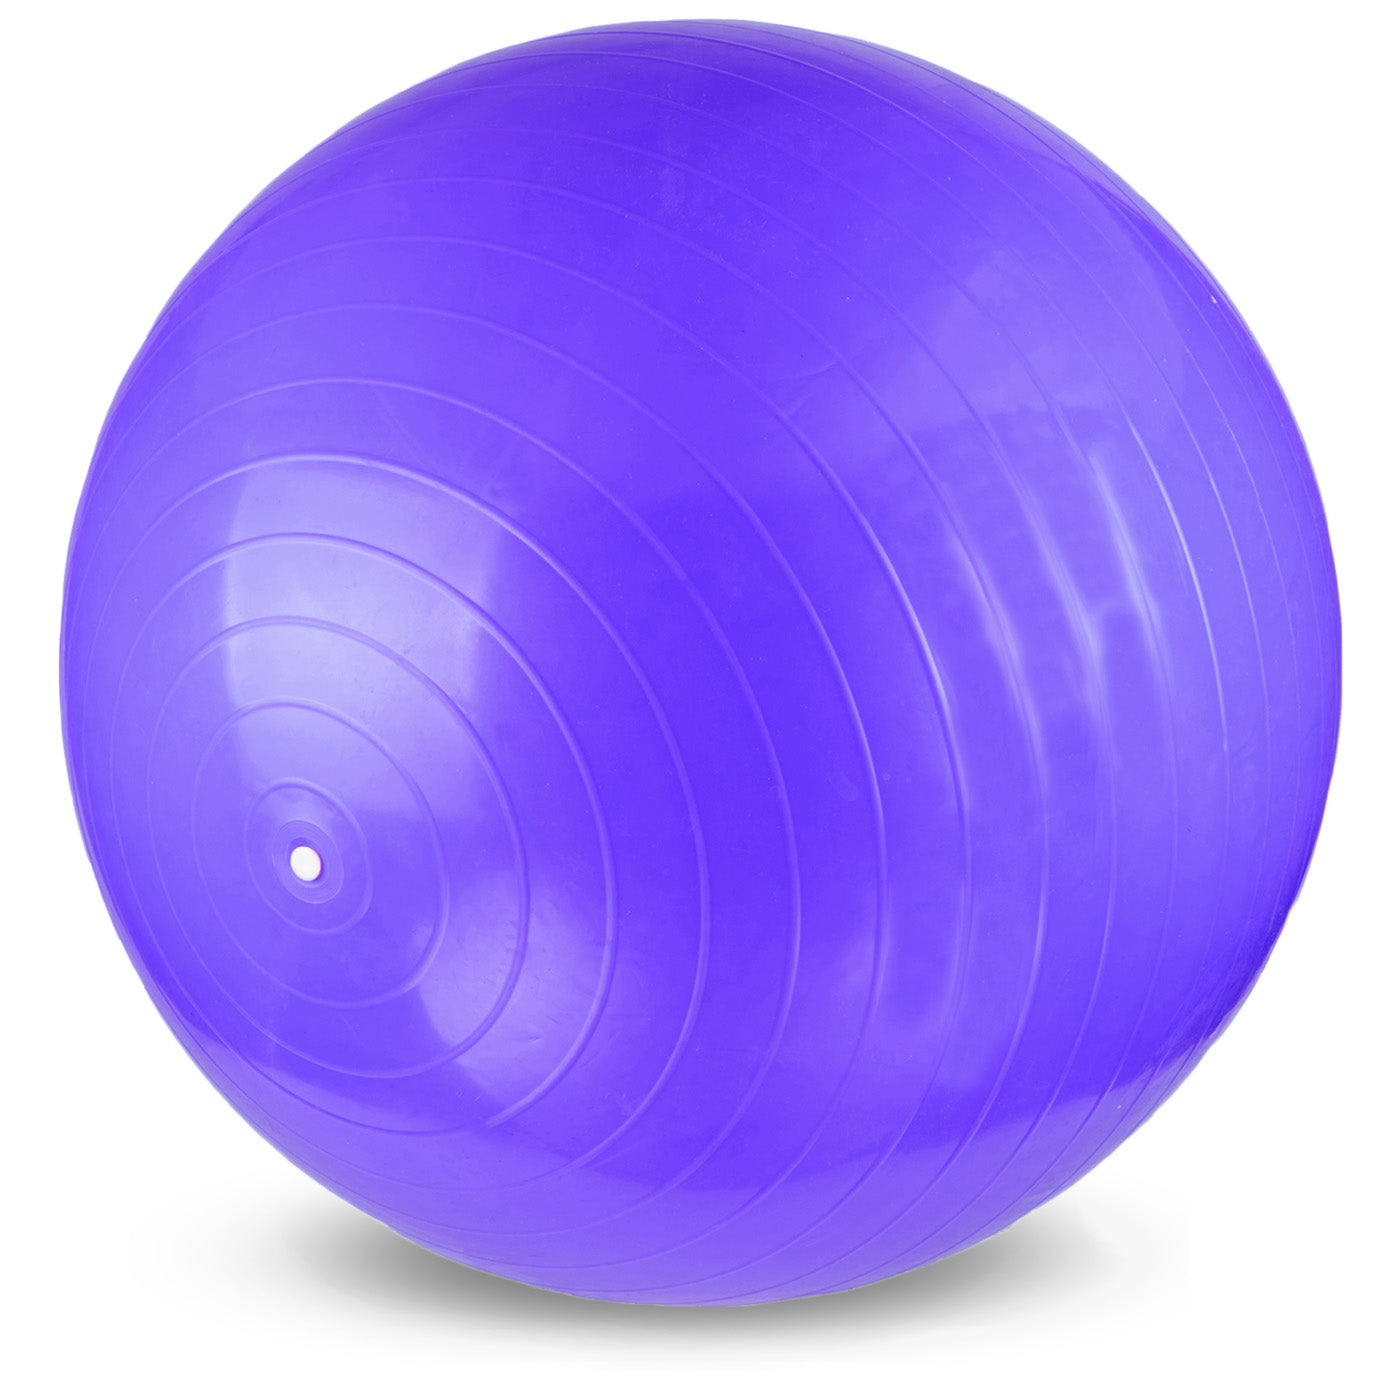 Reehut Anti-Burst Core Exercise Ball w/Pump & Manual for Yoga, Workout,  Fitness (Purple, 45cm),  price tracker / tracking,  price  history charts,  price watches,  price drop alerts